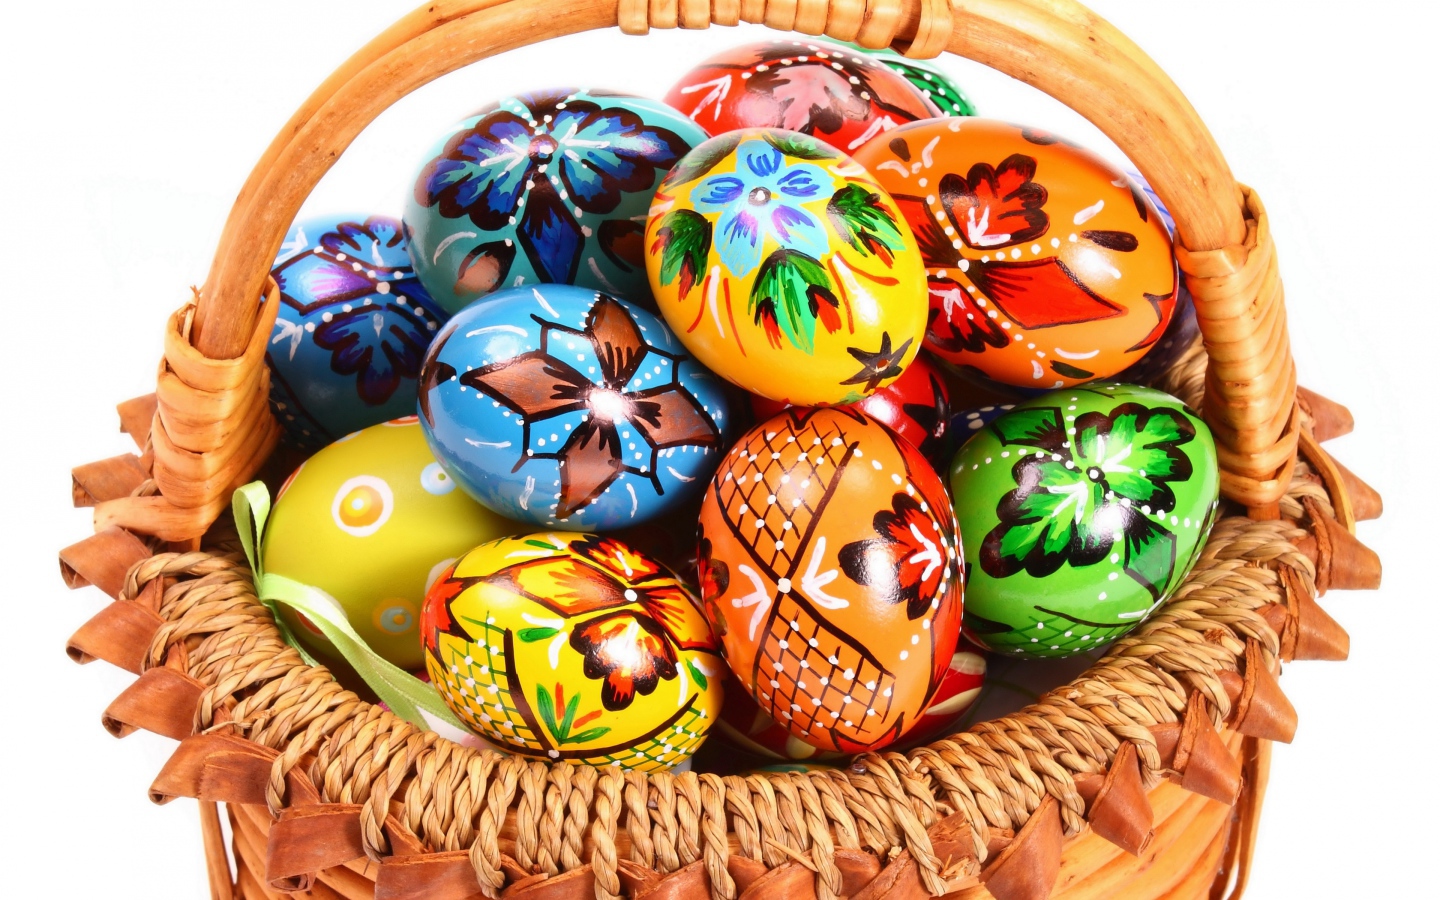 Basket of painted Easter eggs